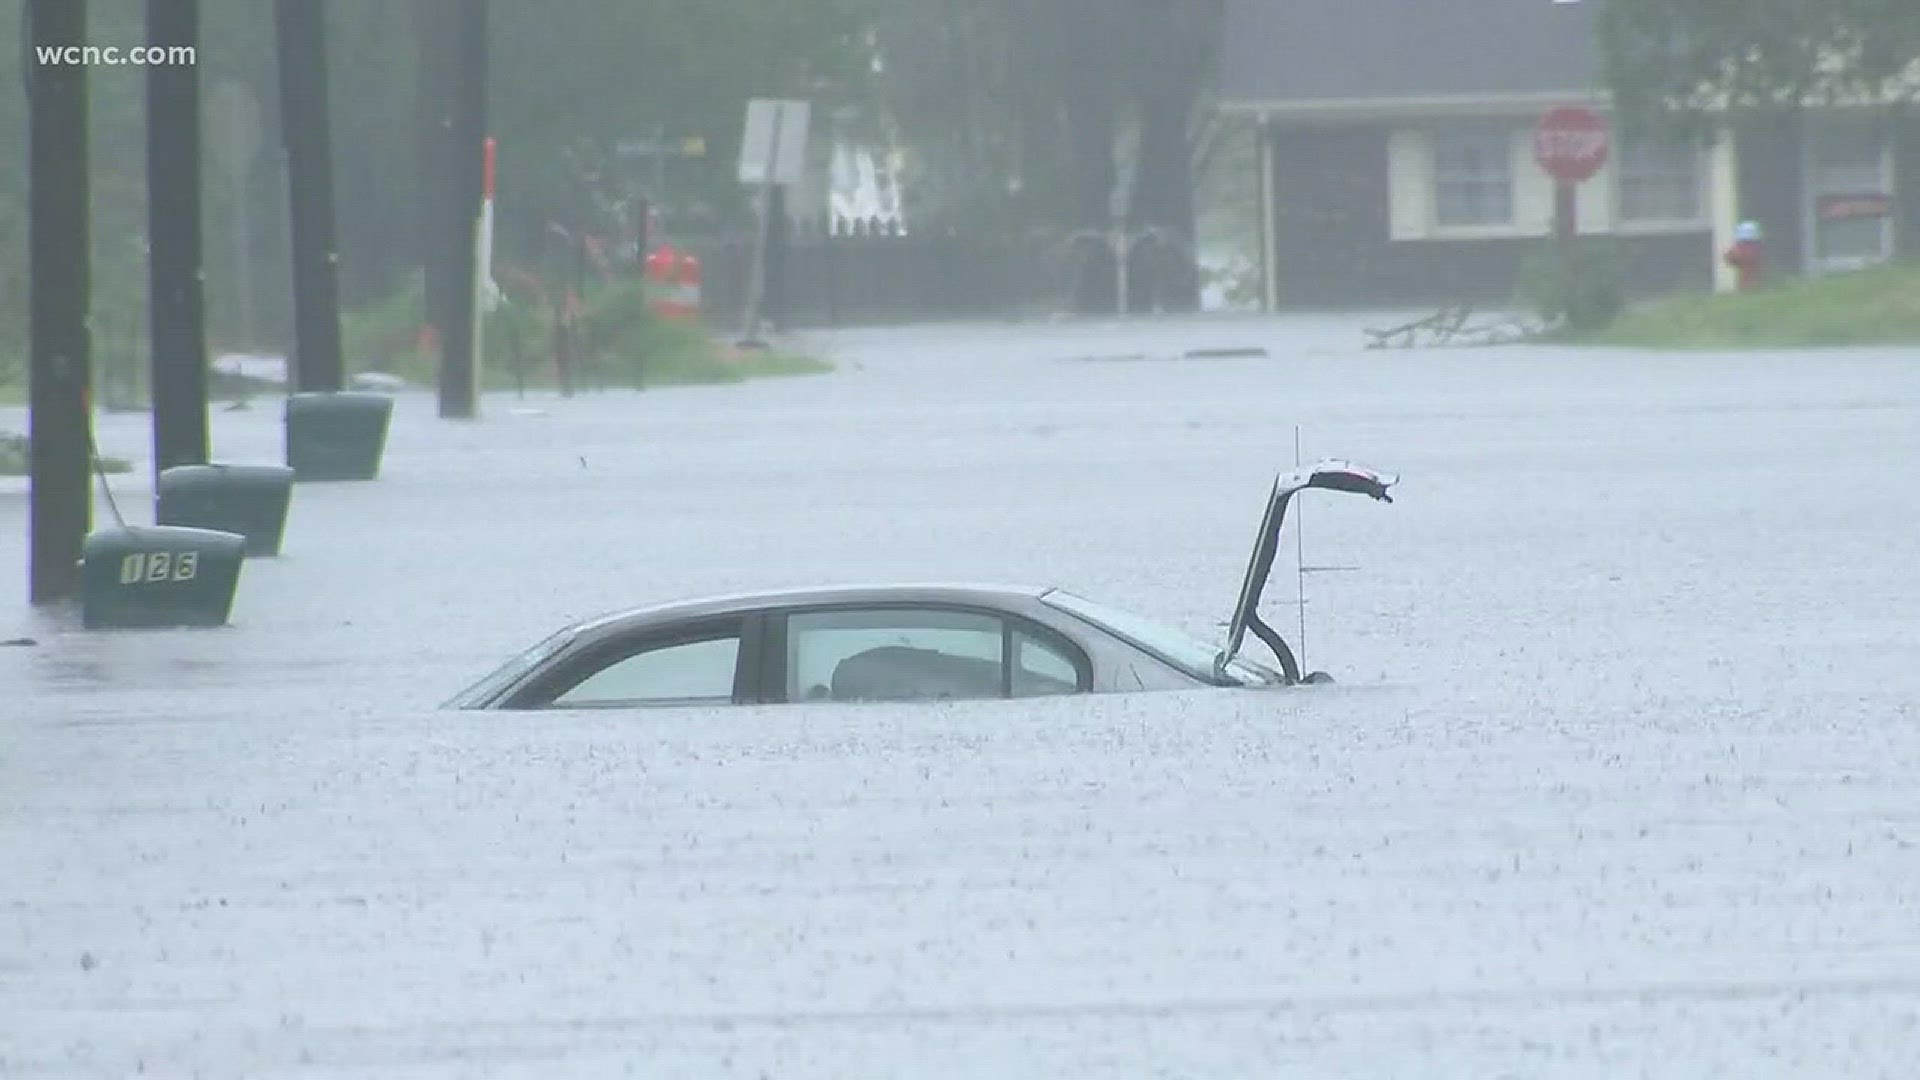 In Jacksonville North Carolina, flood waters from Florence have almost completely covered a car.